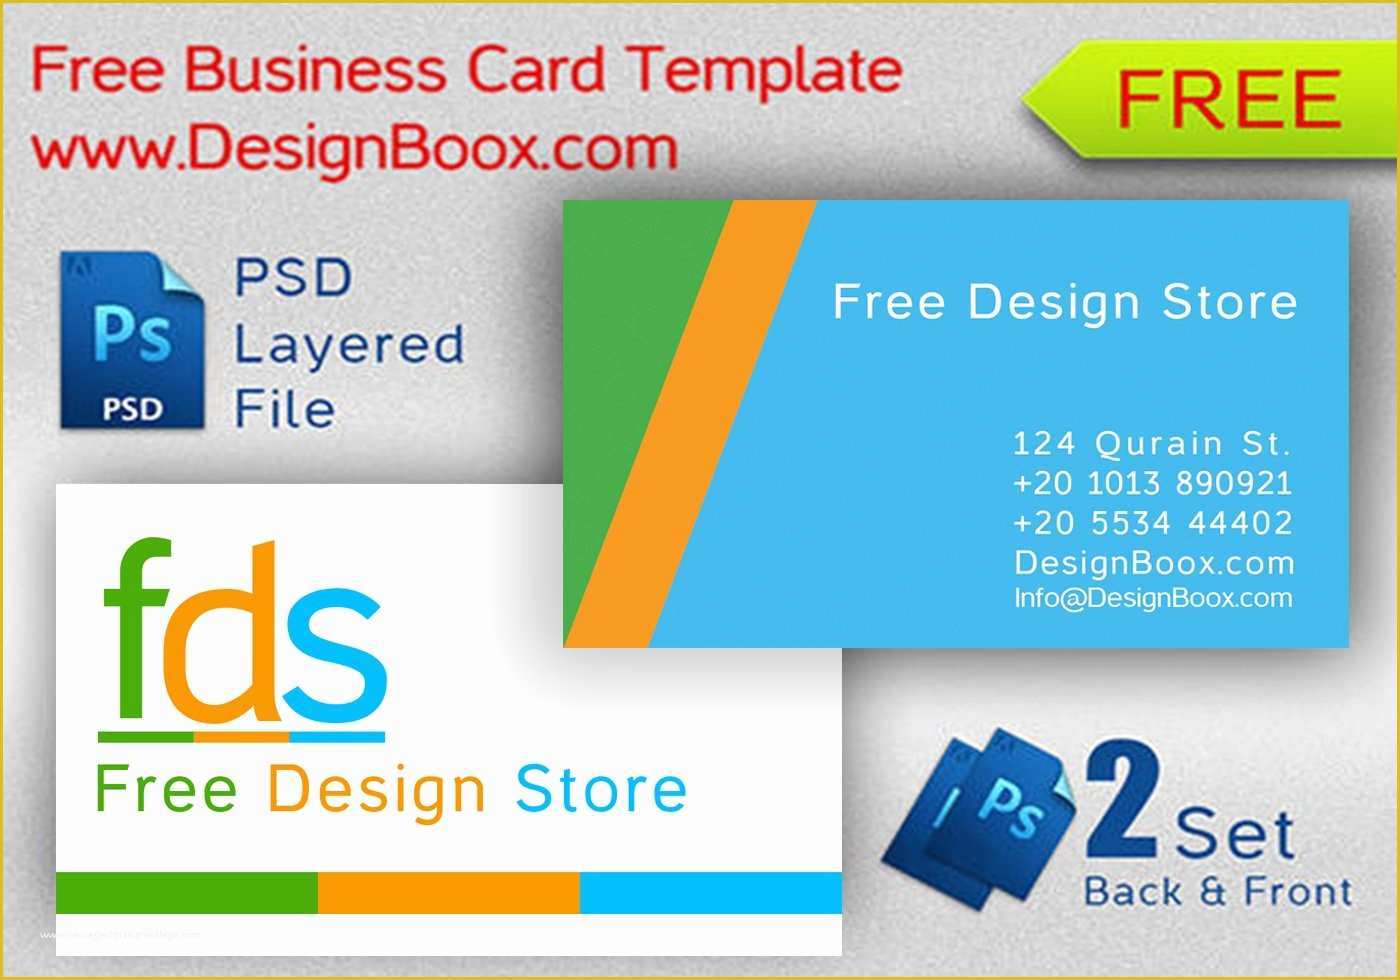 Free Photoshop Business Card Template Of Business Card Template